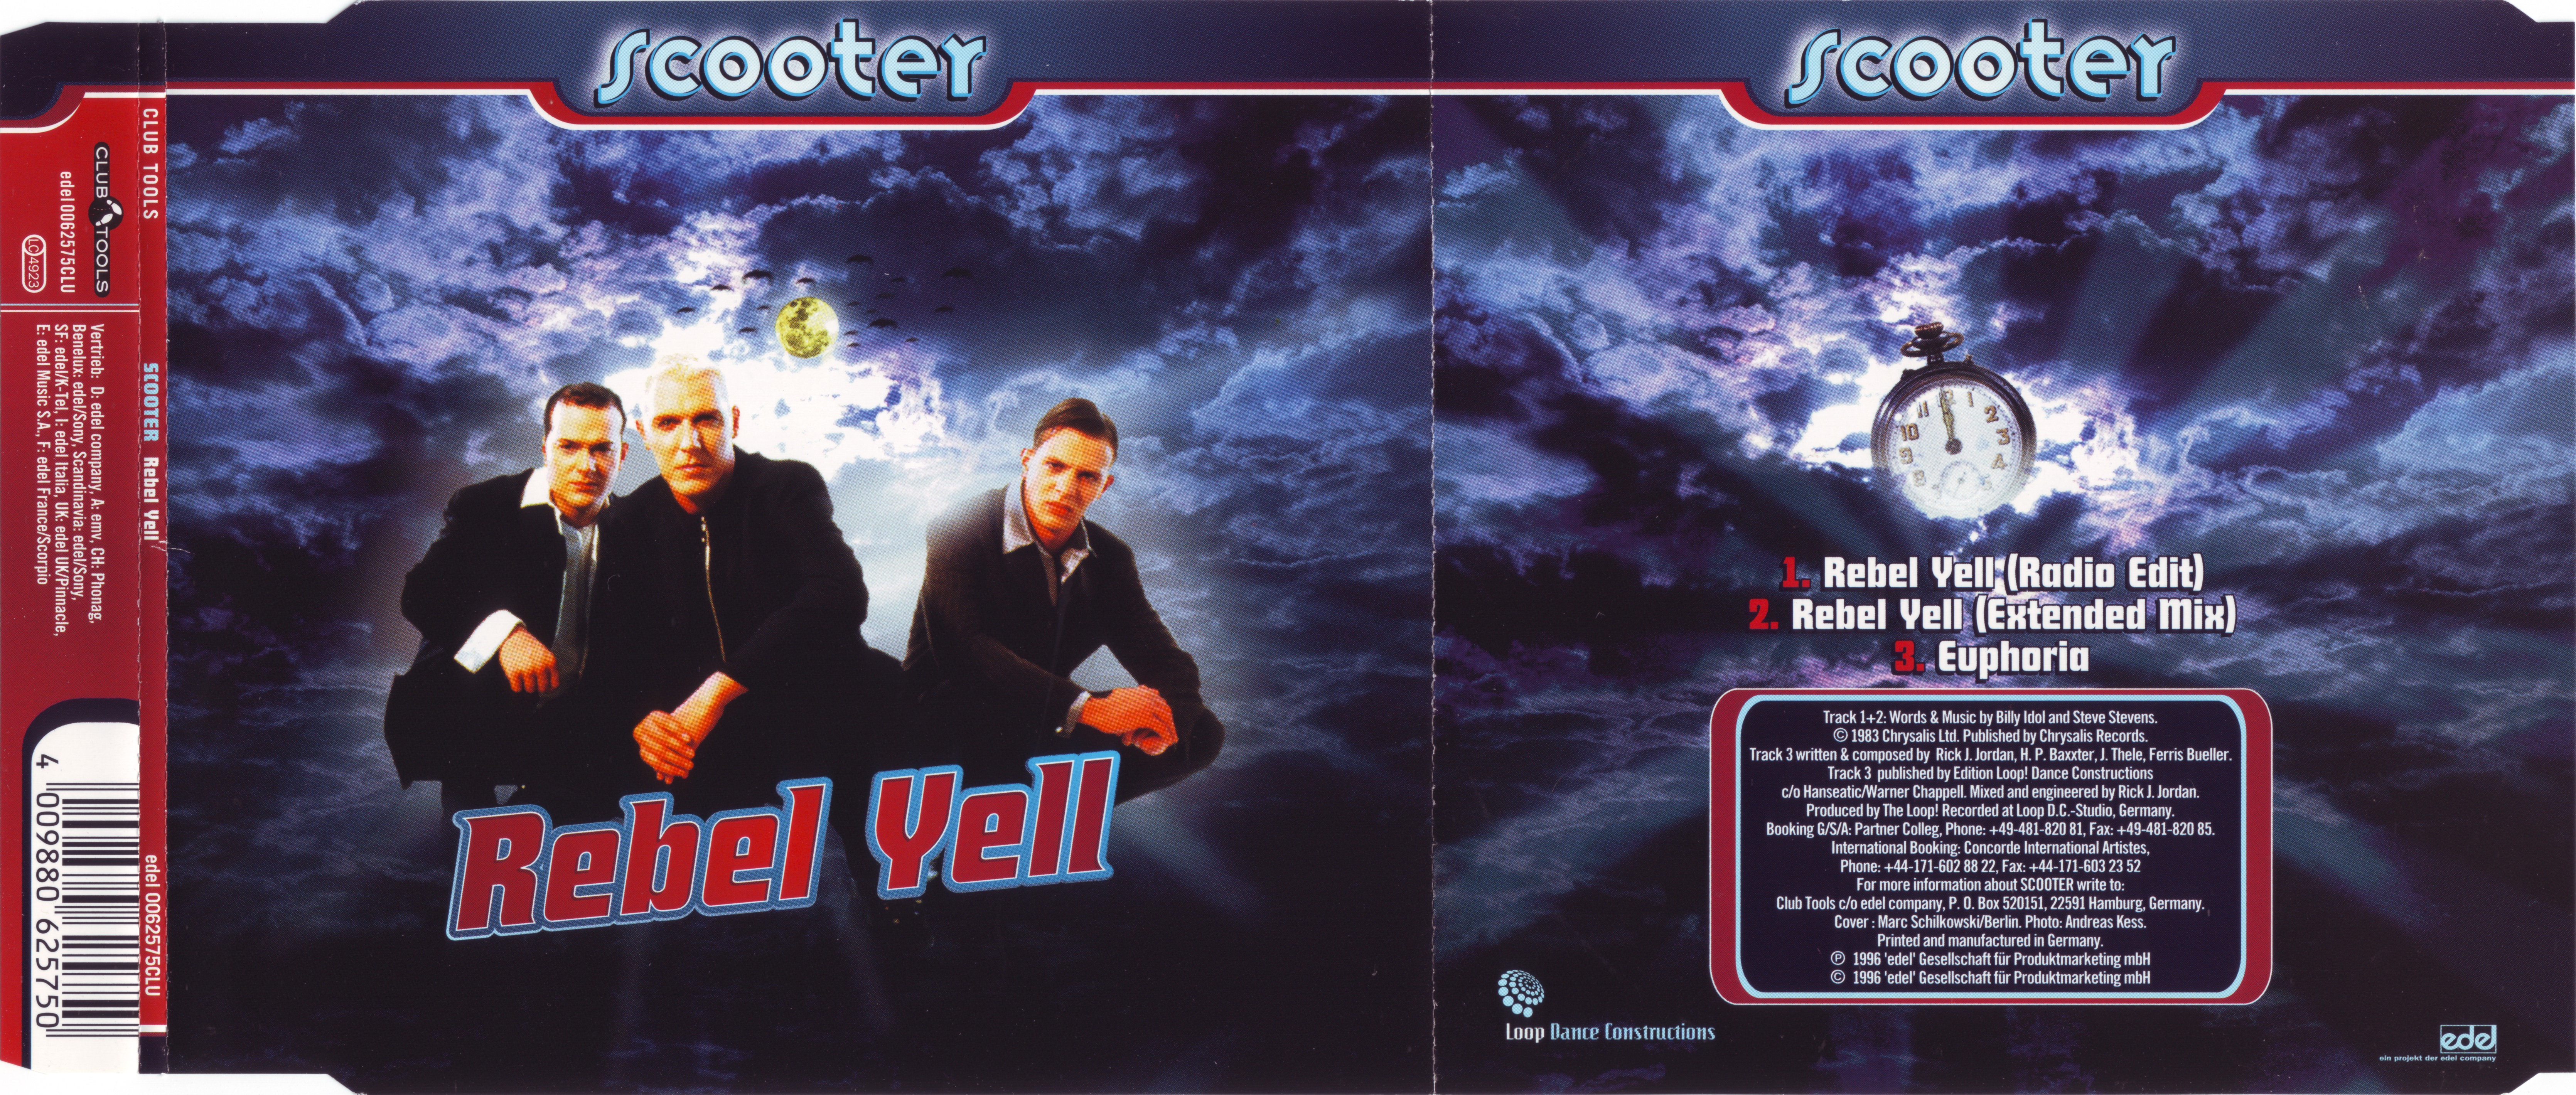 Scooter lets do it again. Scooter Rebel Yell 1996. Scooter синглы. Scooter синглы альбомы. Скутер 1996 альбом.